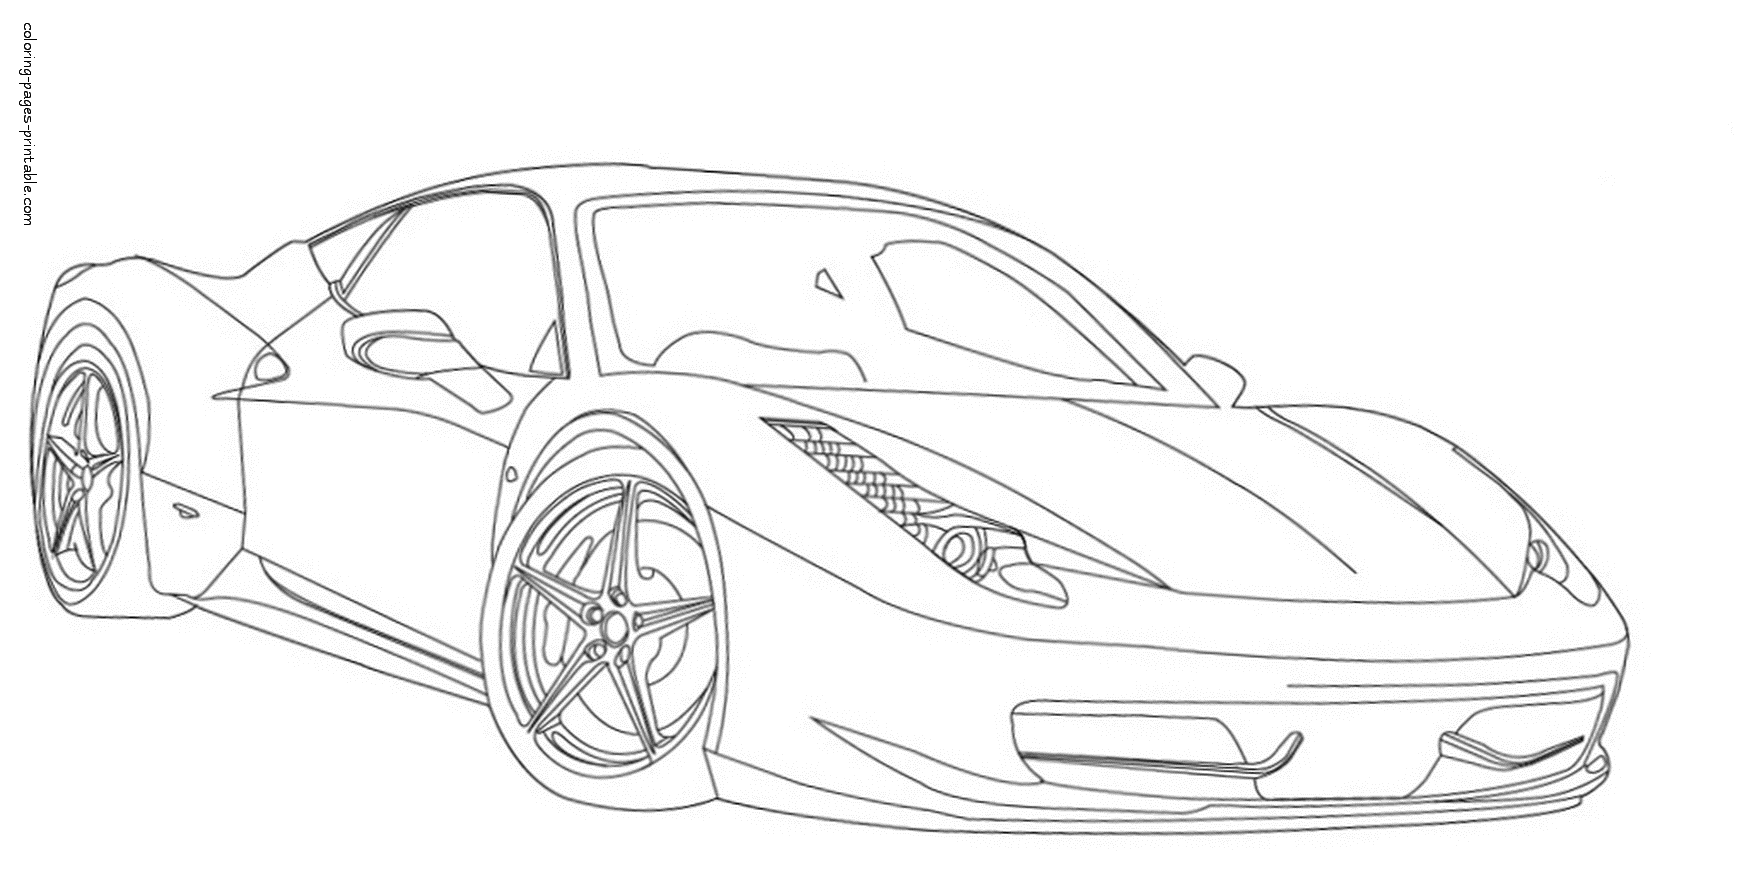 Coloring pages for boys. Ferrari || COLORING-PAGES-PRINTABLE.COM